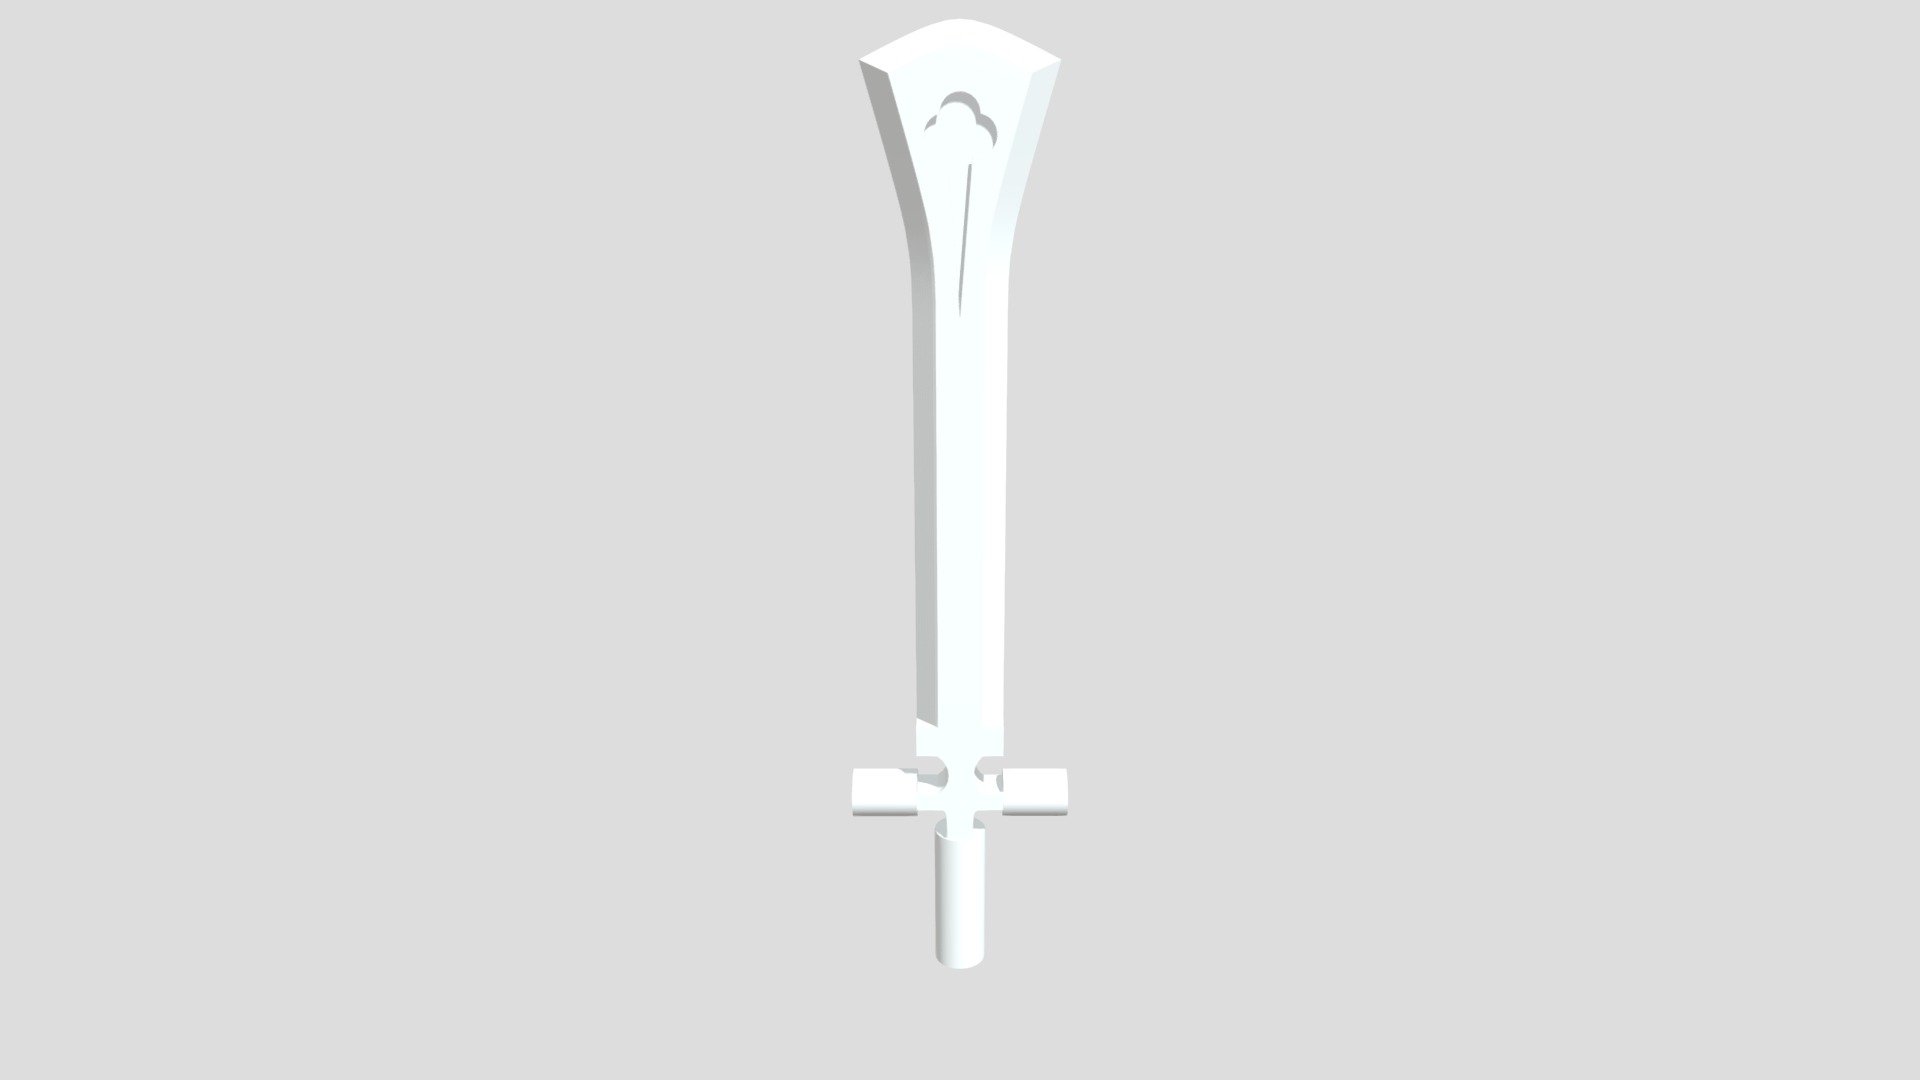 The Demon Destroyer Sword from Black Clover.

Just made this for fun because no one else had a free model. Enjoy if you use! - Demon Destroyer Sword - Download Free 3D model by Reggie (@Reggie.Gabber) 3d model